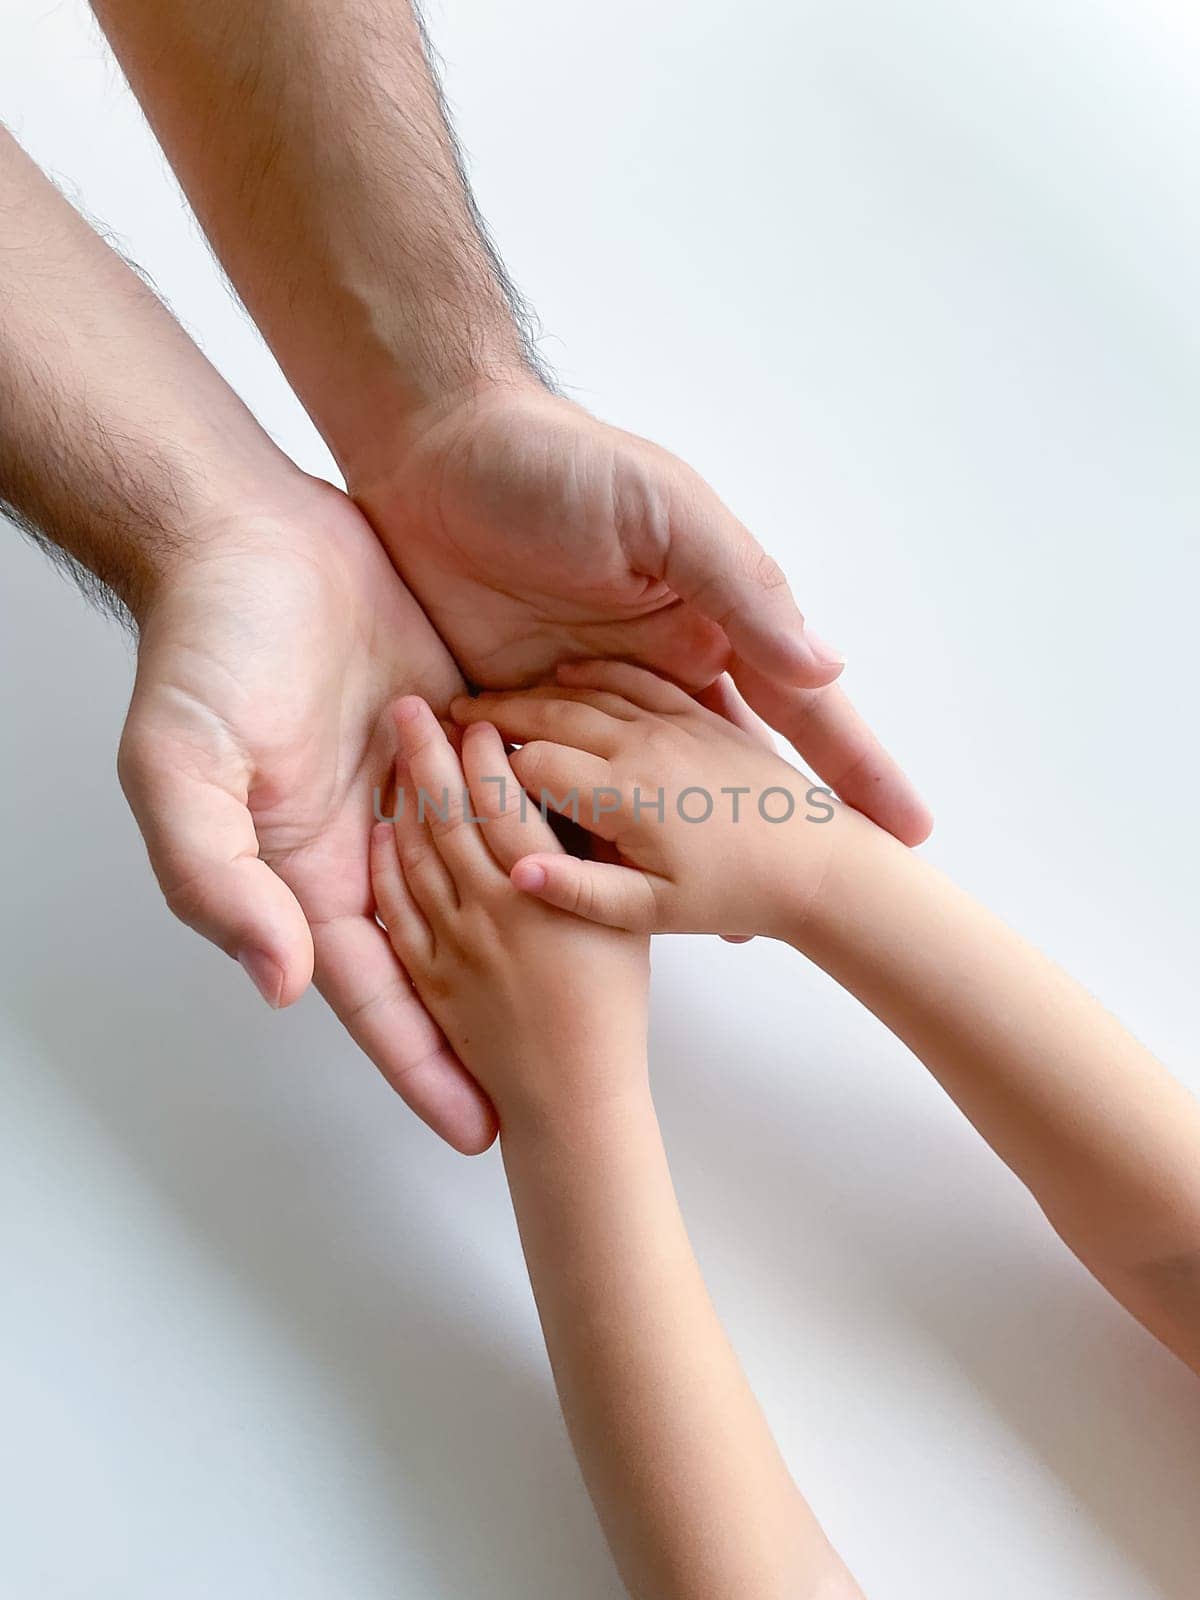 Adult and child hold their hands together. Fathers Day Child gives hand to adult by Lunnica